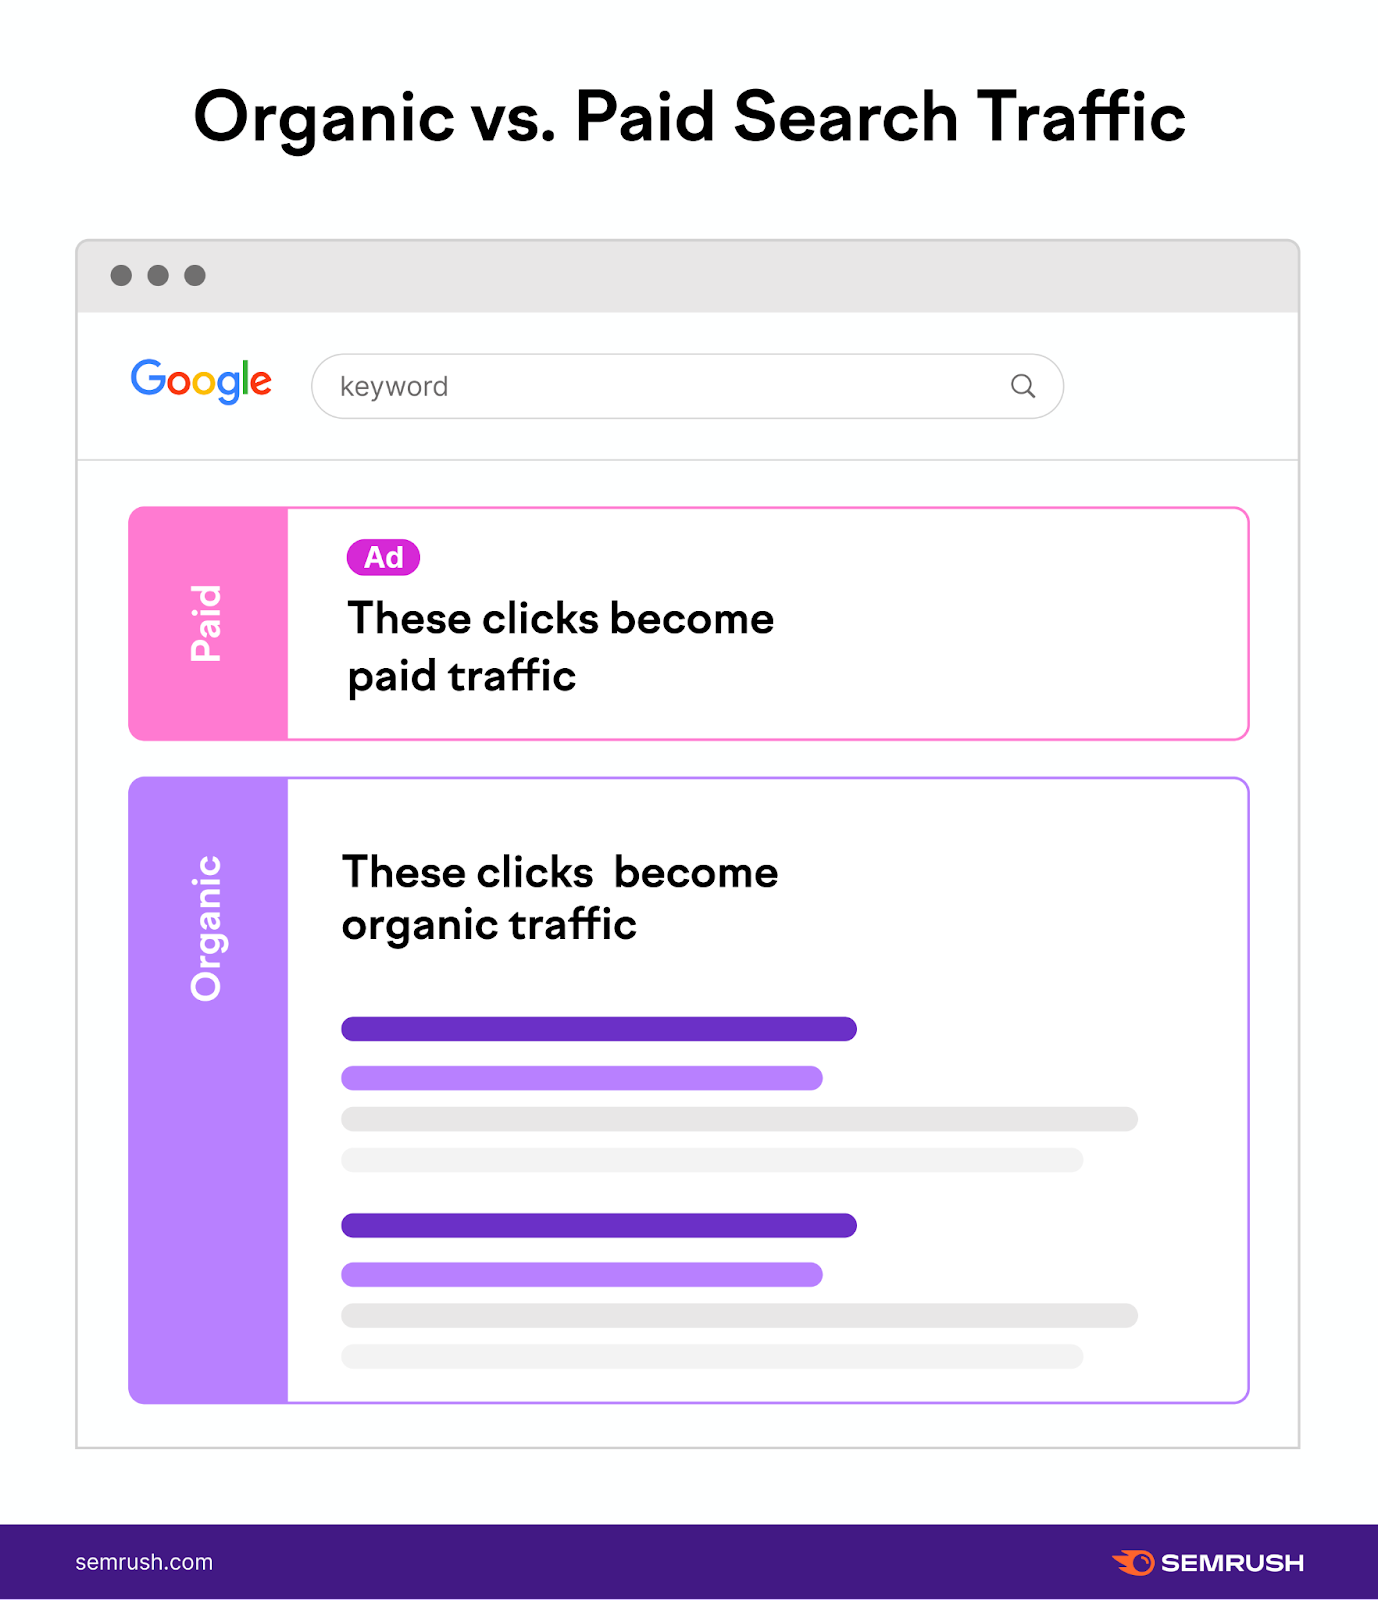 organic vs paid search traffic infographic